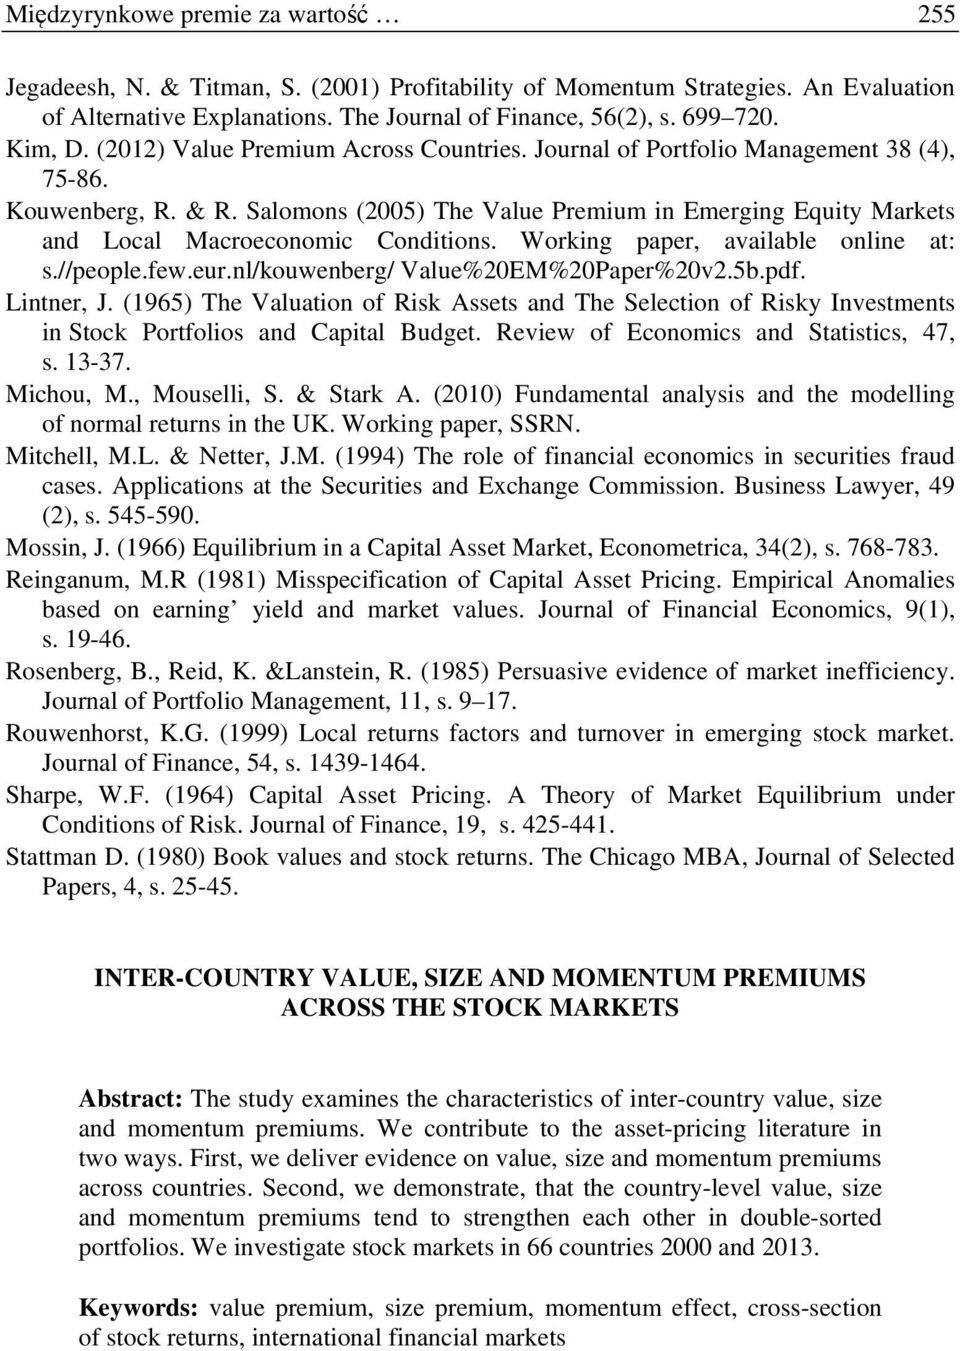 Salomons (2005) The Value Premium in Emerging Equity Markets and Local Macroeconomic Conditions. Working paper, available online at: s.//people.few.eur.nl/kouwenberg/ Value%20EM%20Paper%20v2.5b.pdf.